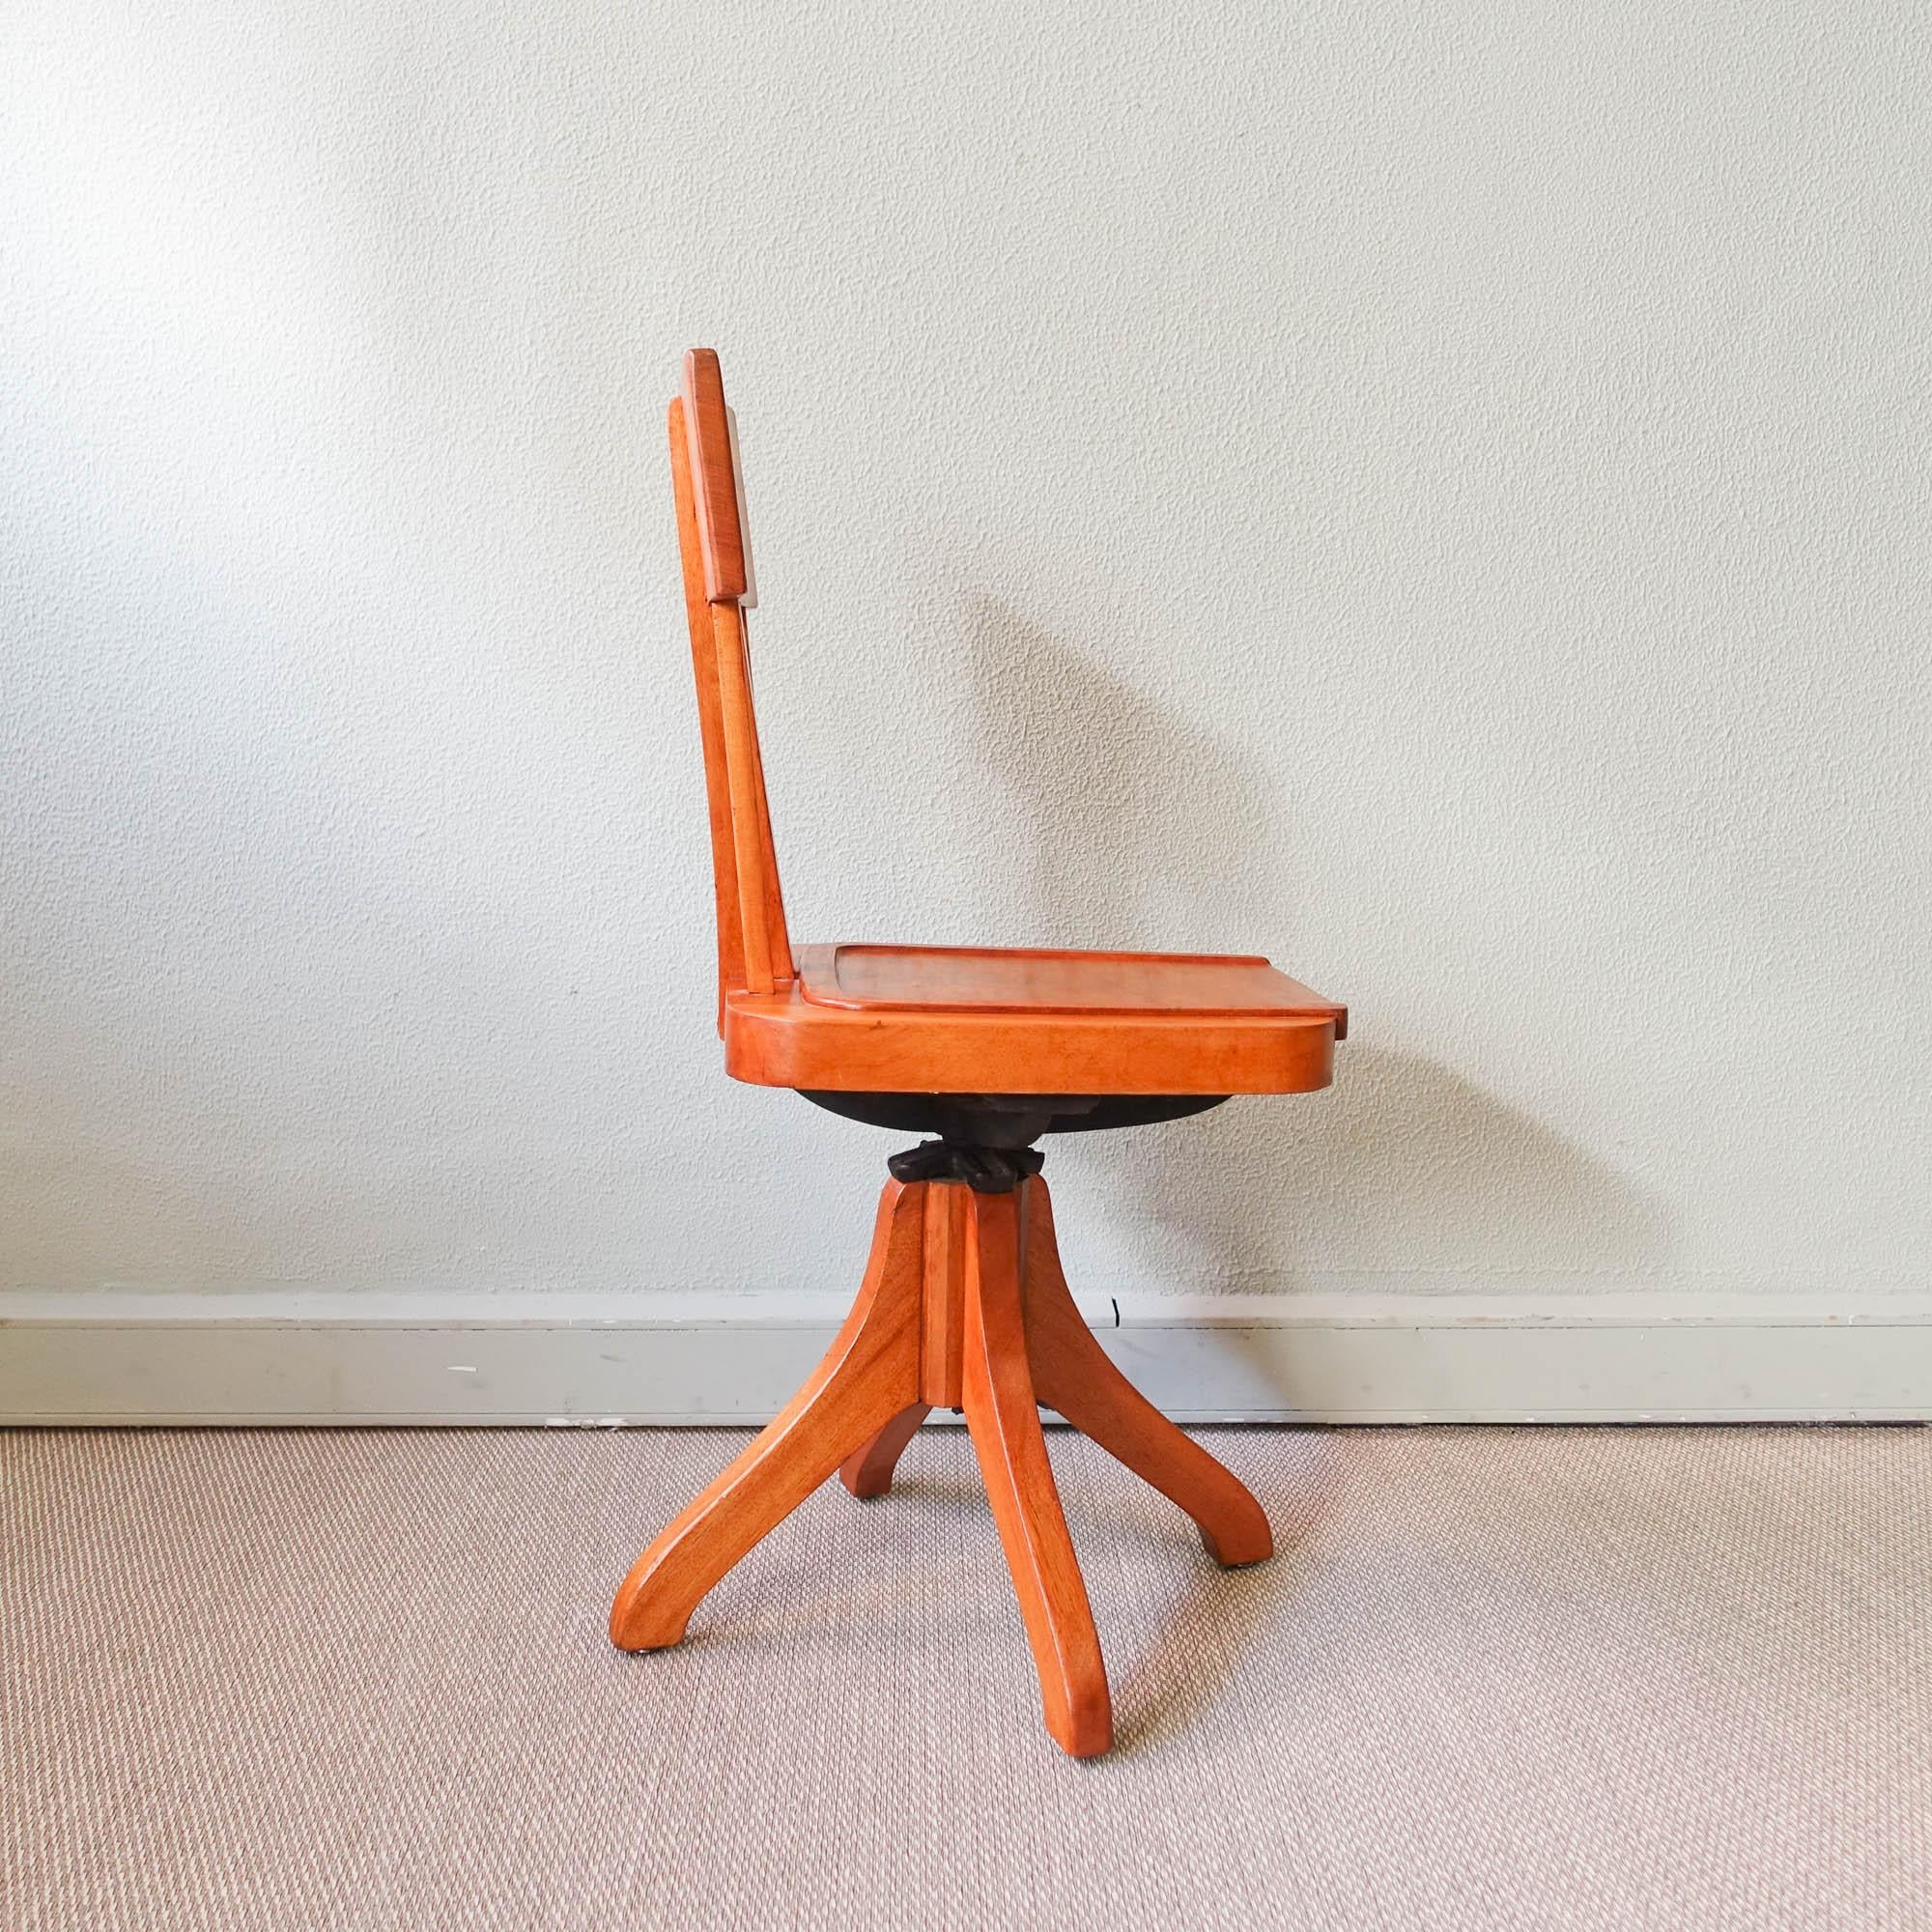 Mid-20th Century Typist Chair, Model Simples, by Móveis Olaio, 1940's For Sale